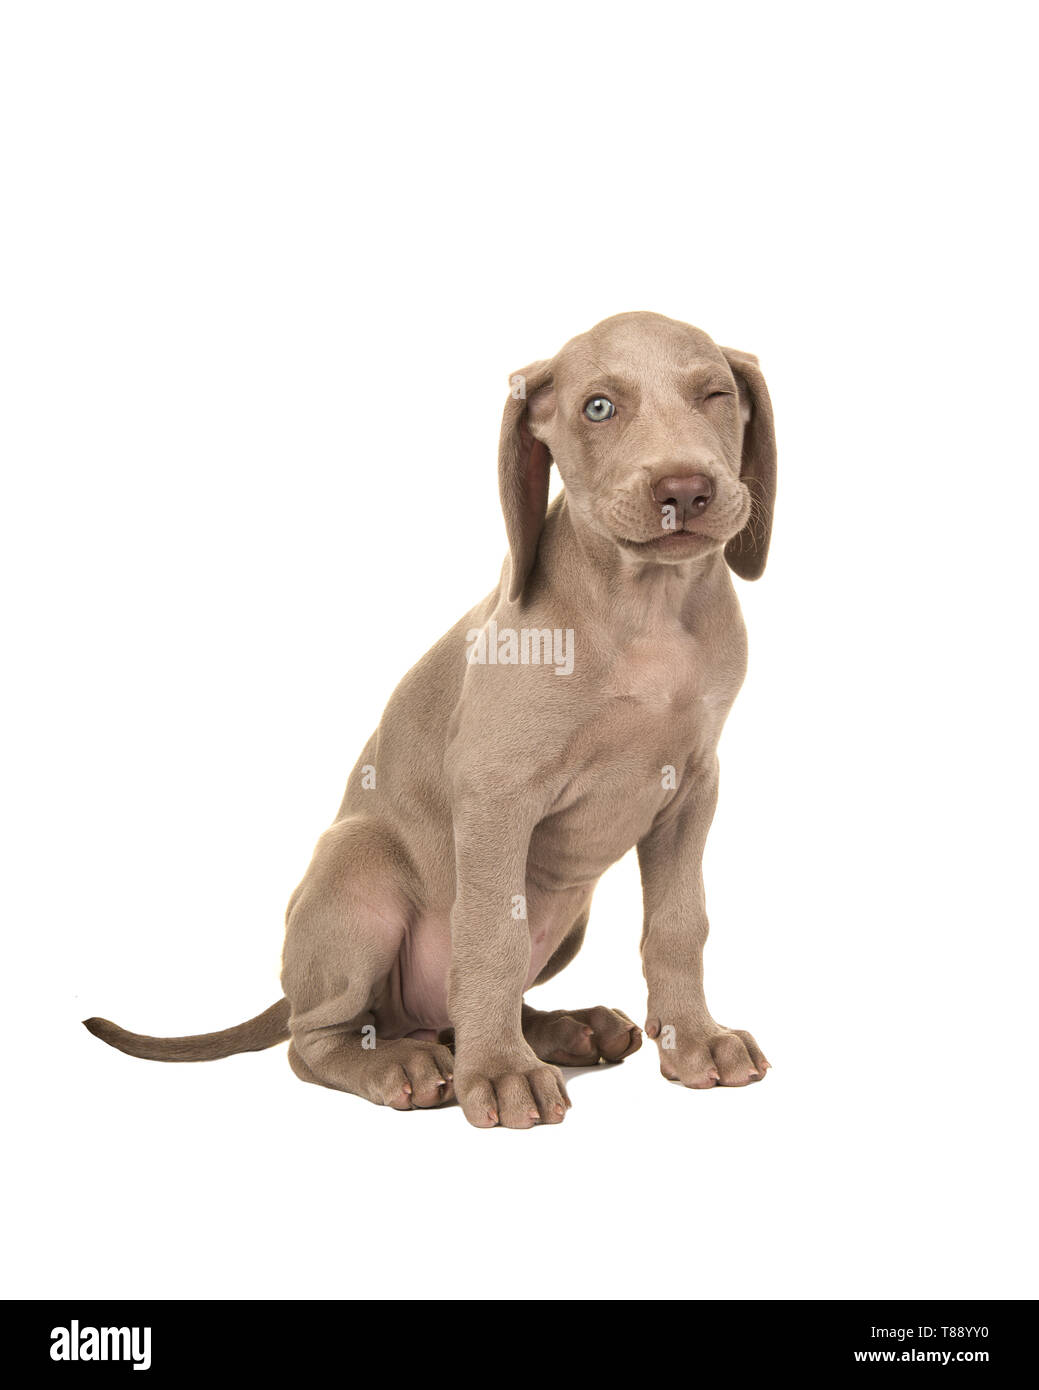 Cute sitting winking weimaraner puppy with blue eyes isolated on a white background Stock Photo